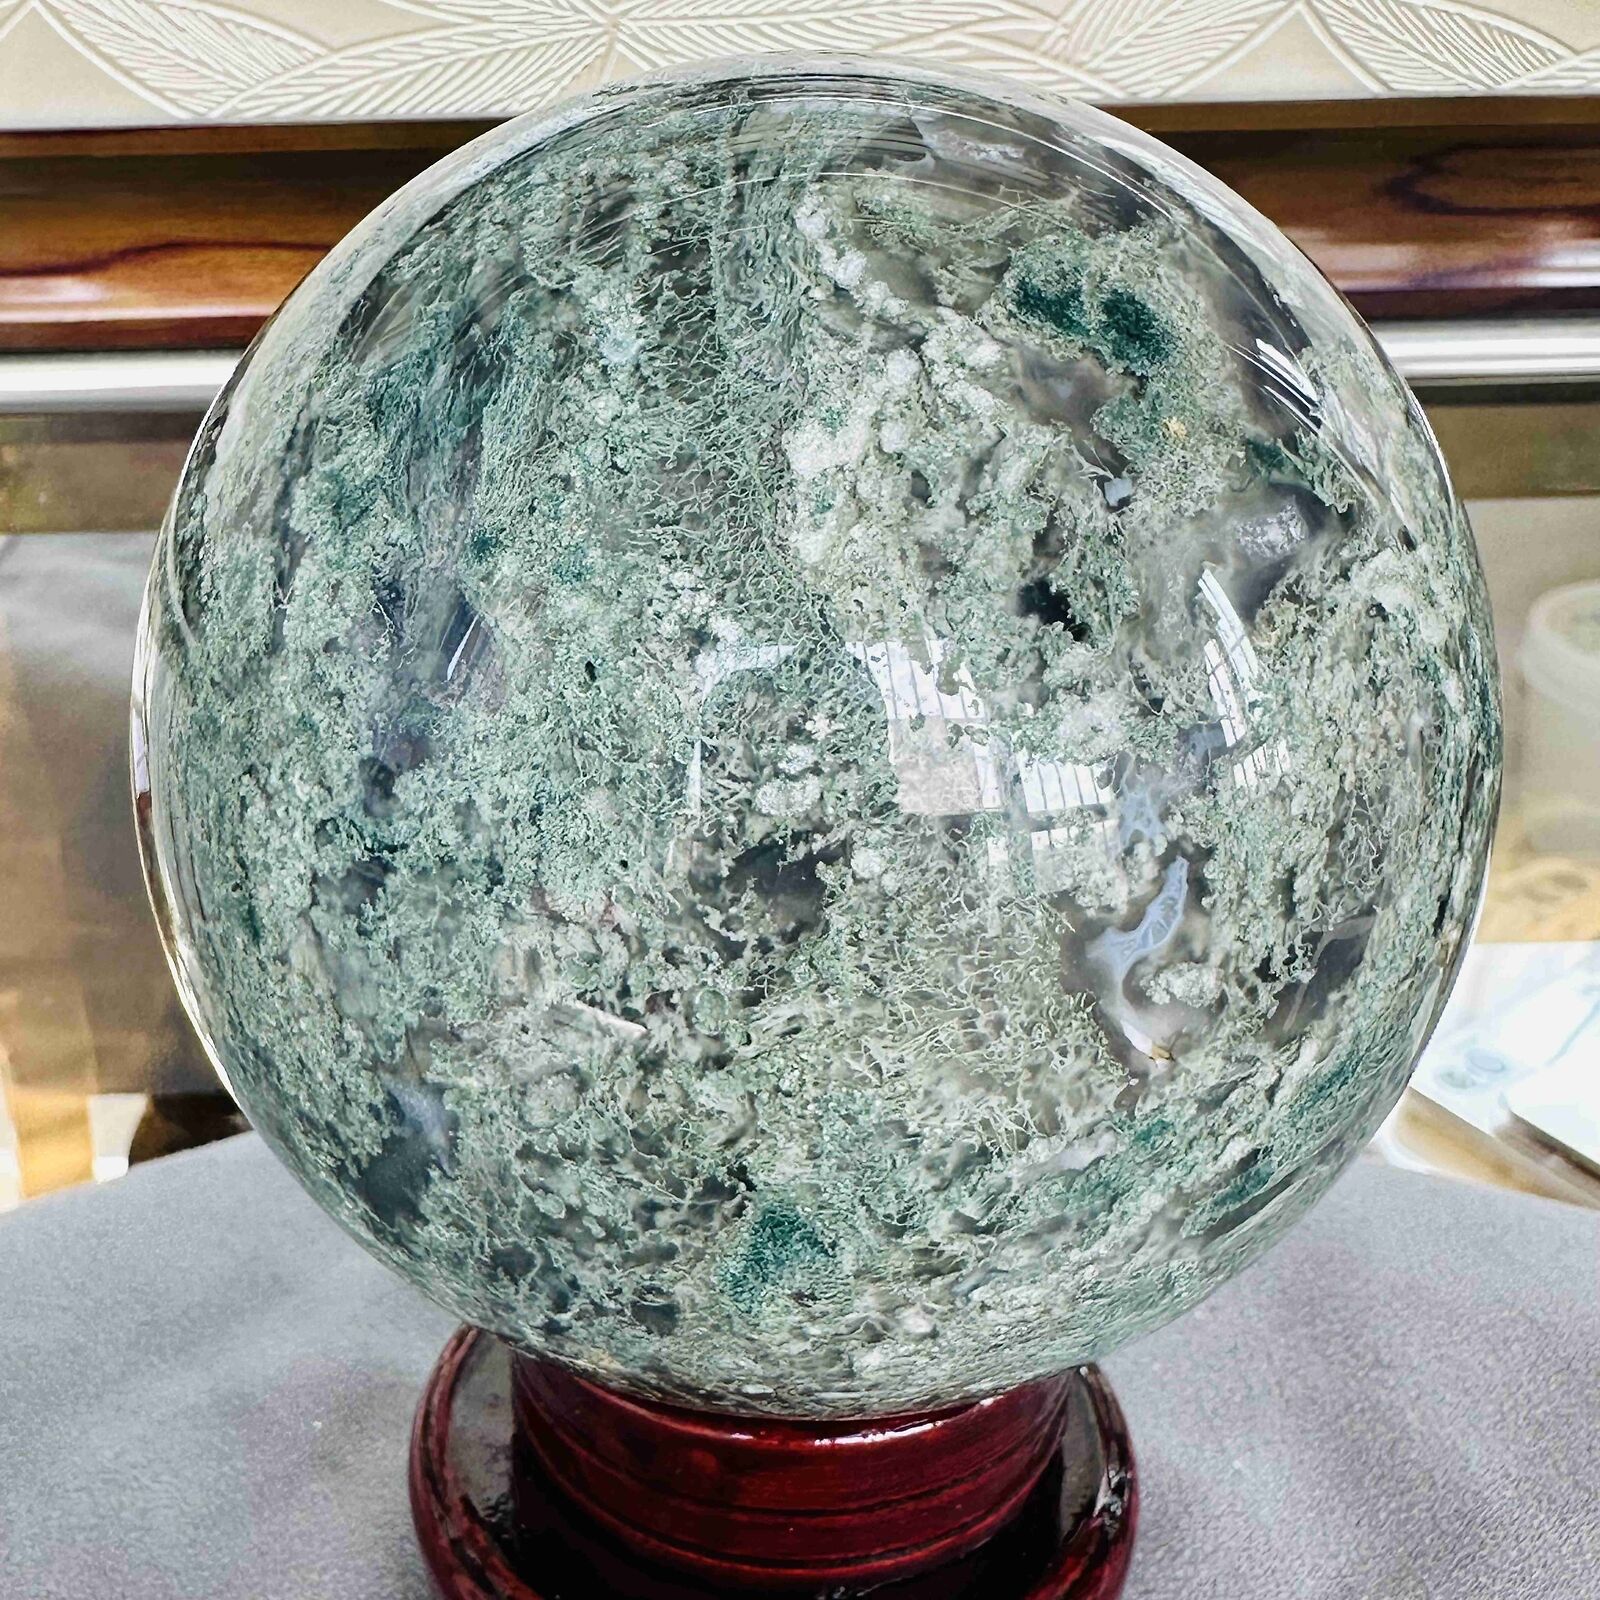 Natural Geode Aquatic Plant Water Grass Moss Agate Crystal Sphere Healing 1603G